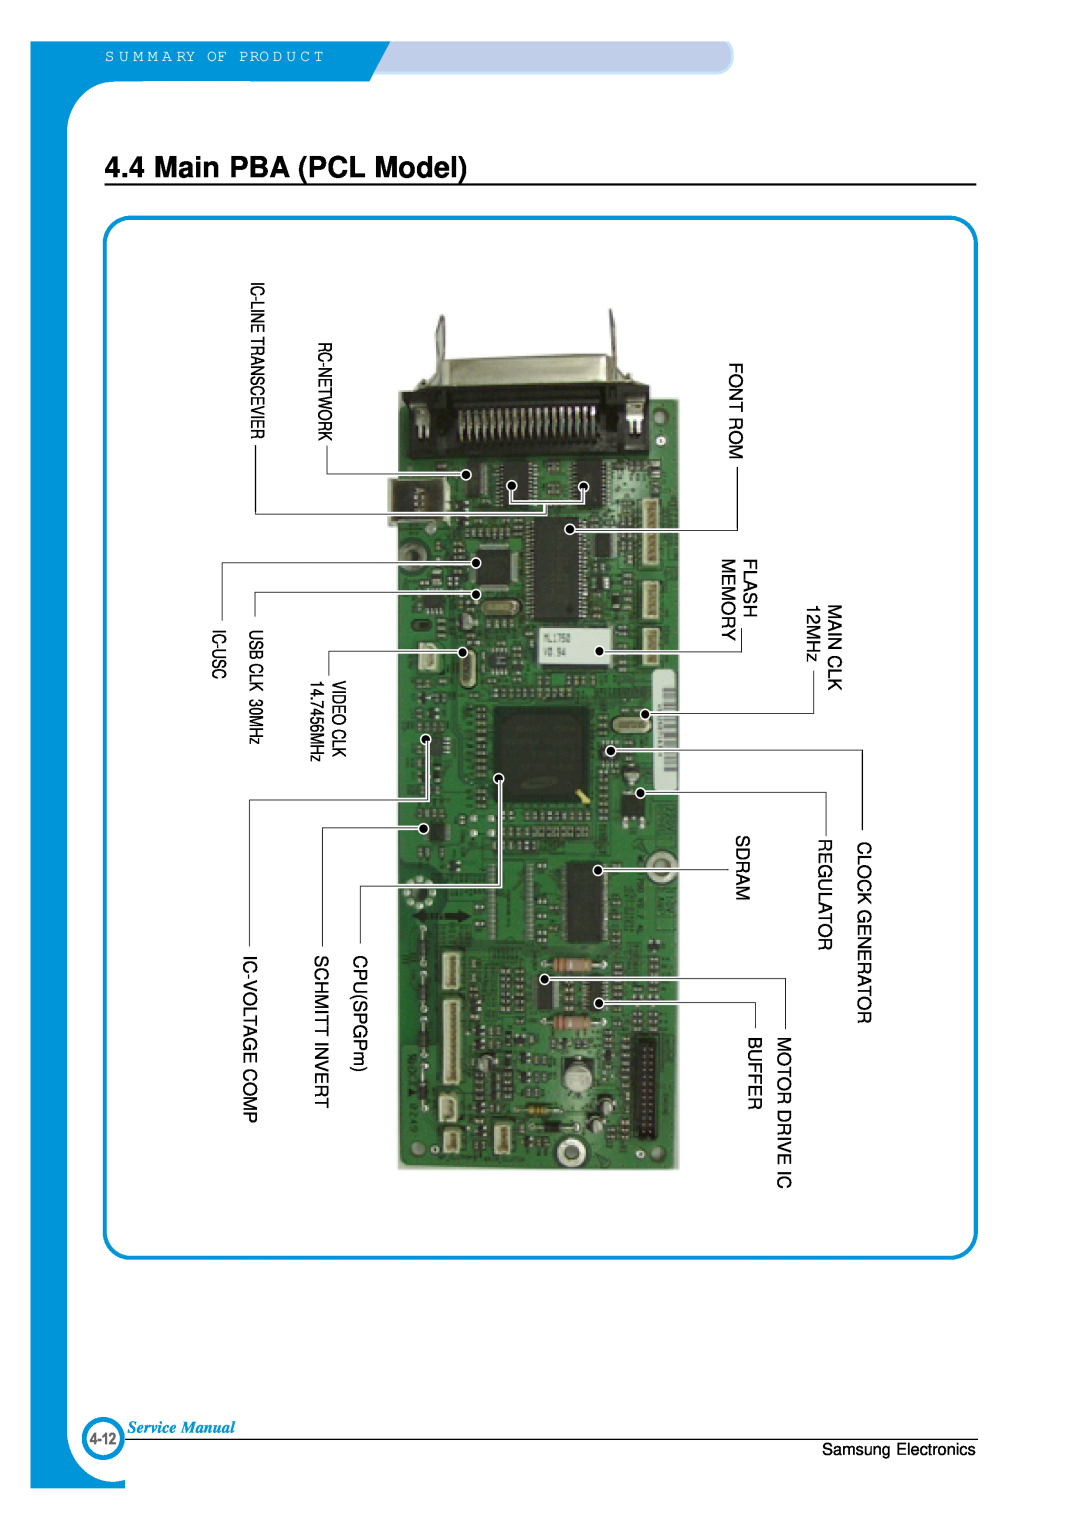 Samsung ML-1700 specifications Main PBA PCL Model, Ic-Line Transcevier, Rc-Network, Ic-Usc, USB CLK 30MHz 